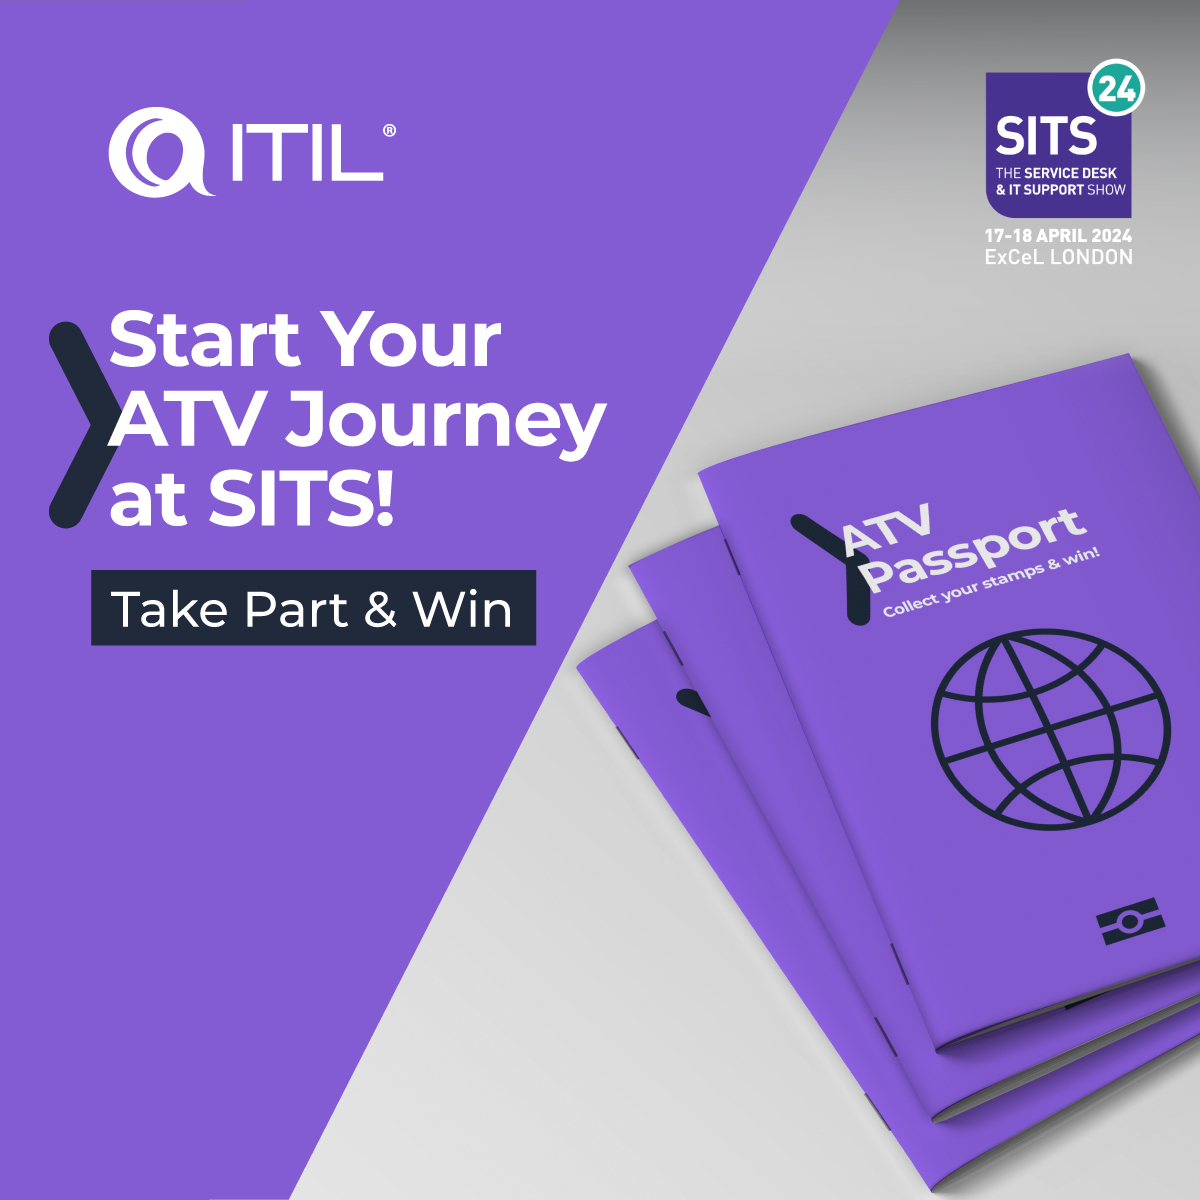 Stop by booth #113 to get your ATV passport, collect stamps from our partners’ booths & enter the draw to win 1 Apple Watch!
 
Come say hi!
 
#SITS24  #ITSM  #ServiceDesk